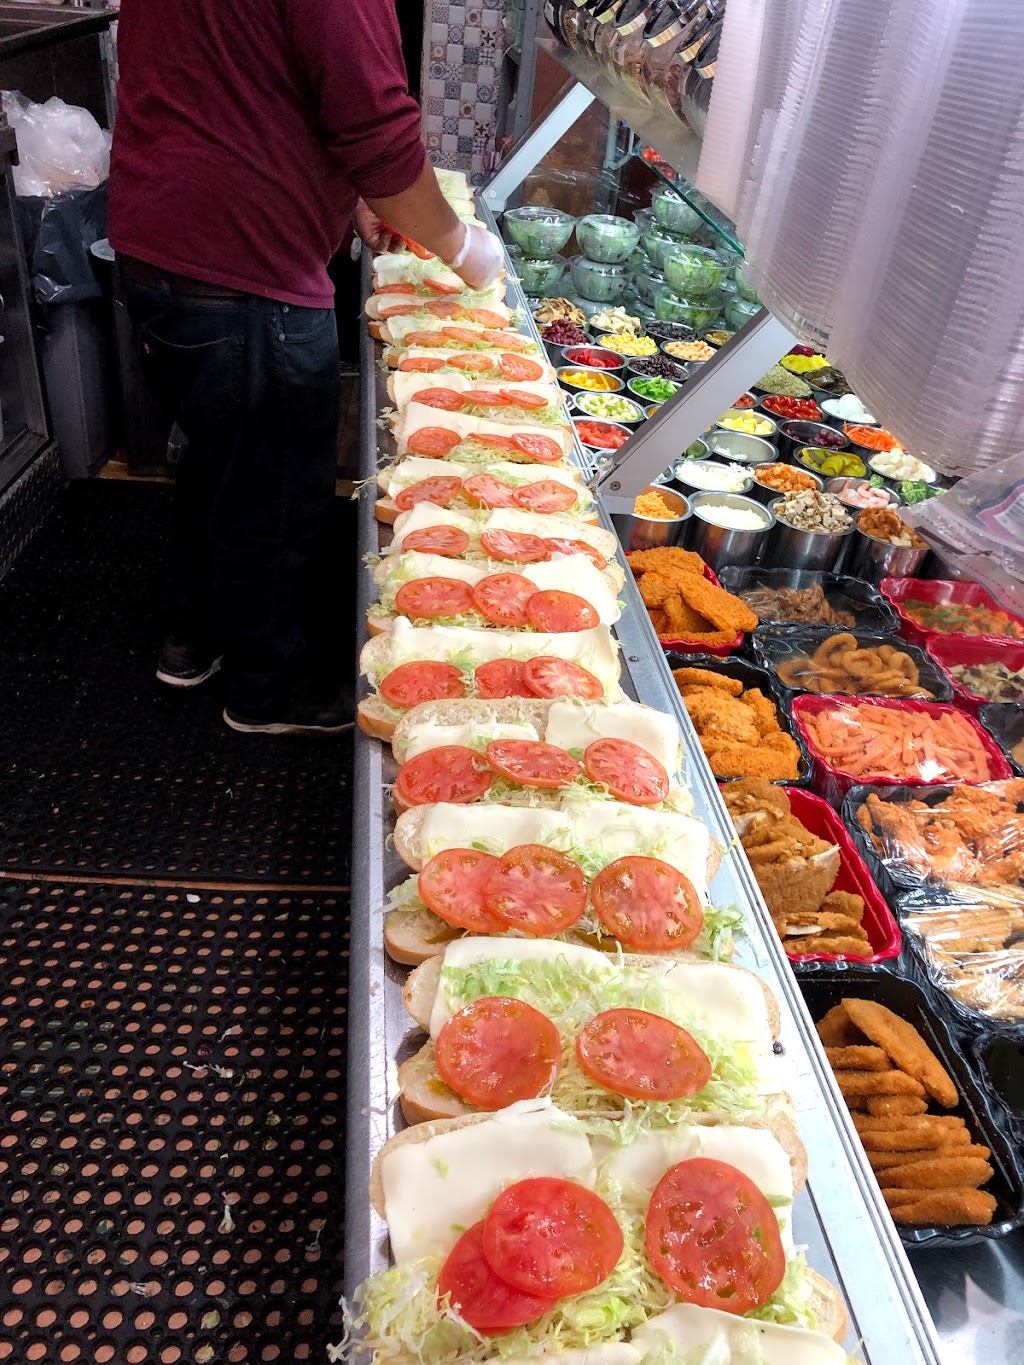 Best Deli & Grill | 201-203 W 242nd St, The Bronx, NY 10471 | Phone: (929) 243-3333